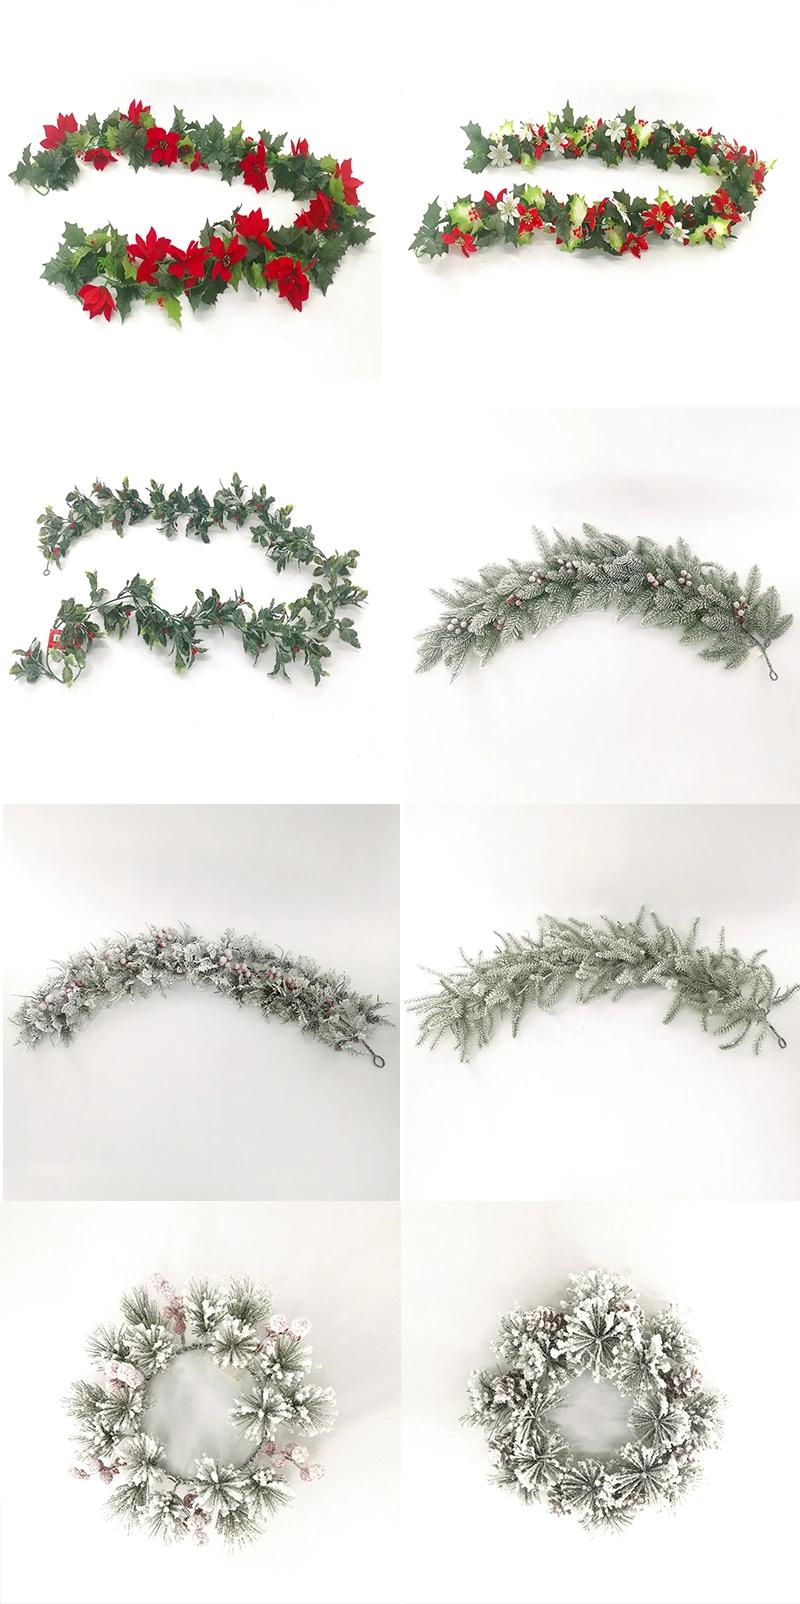 Factory Supply 6FT Eucalyptus Garland Greenery Artificial Vines